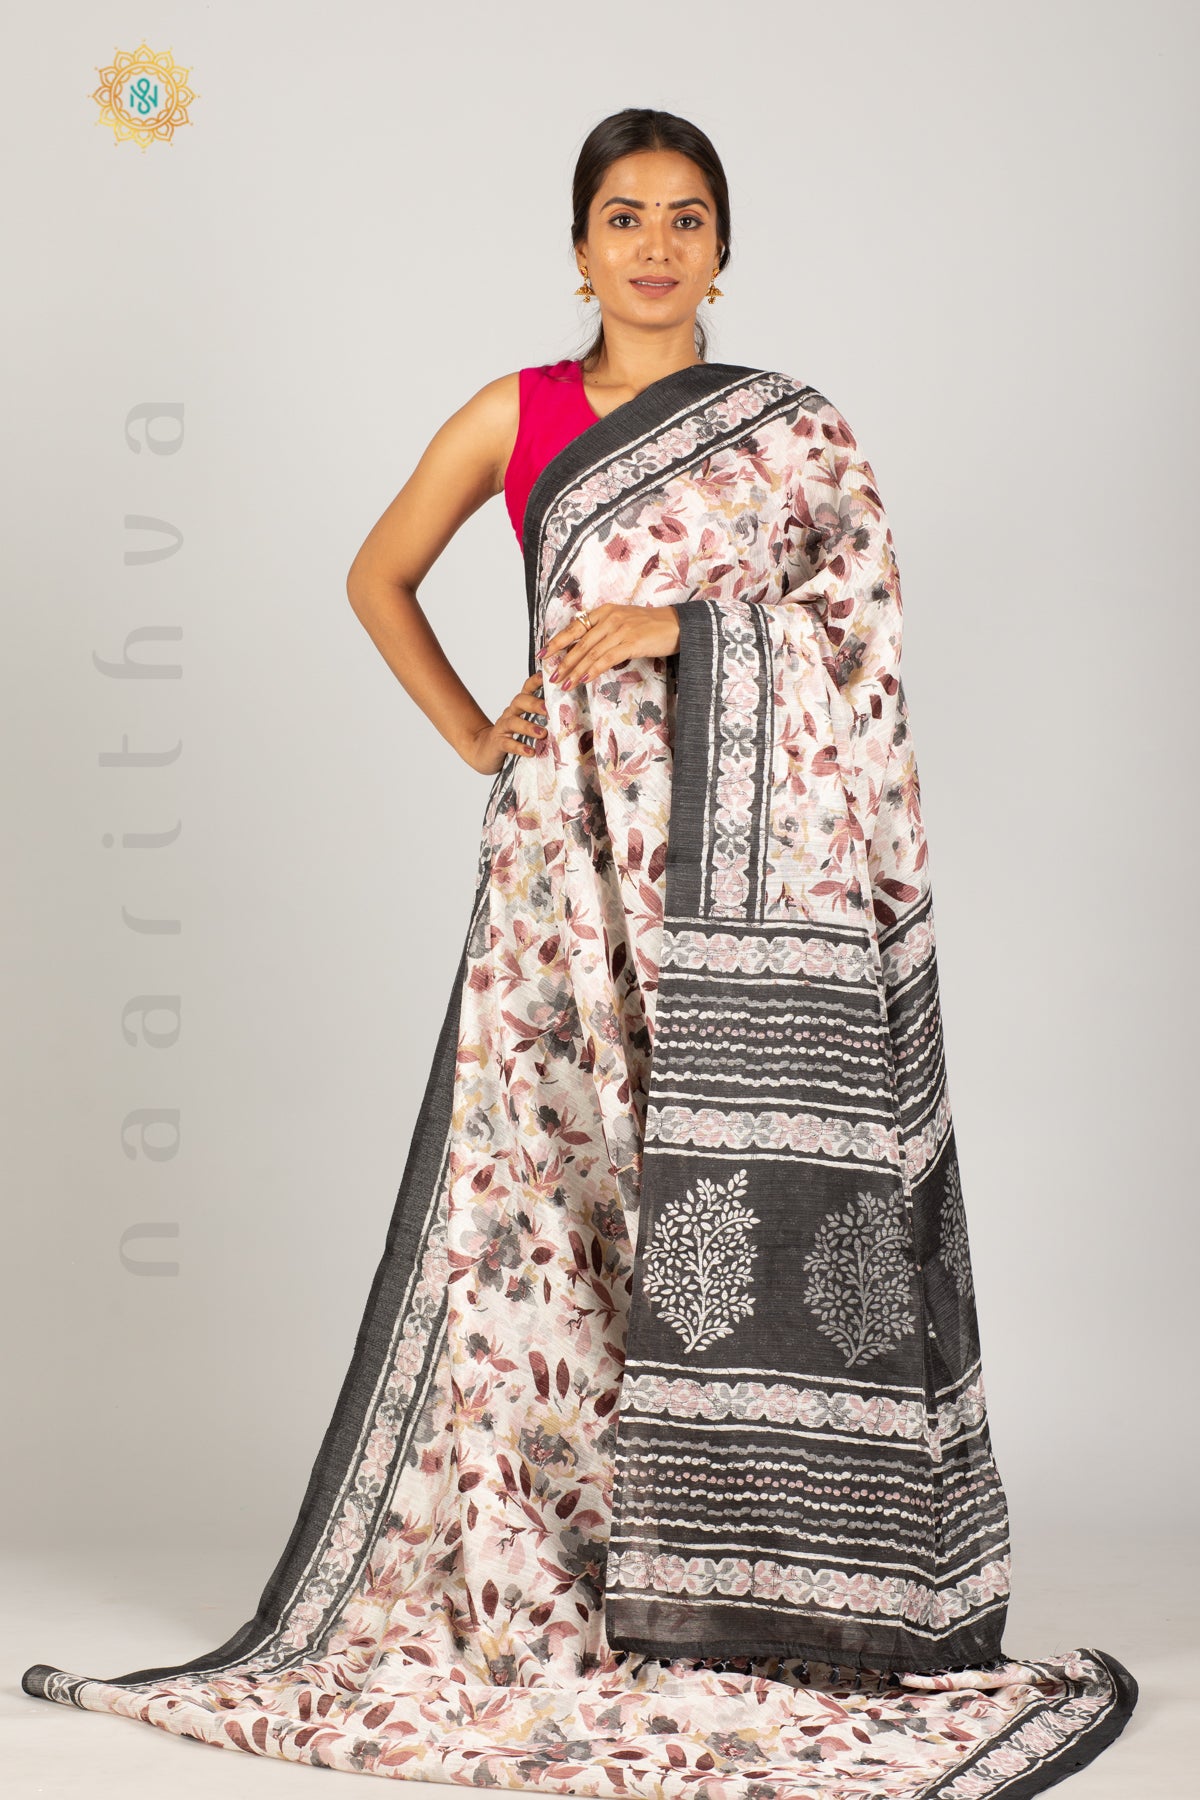 KOTHA LINEN WITH DIGITAL PRINTS ON THE BODY